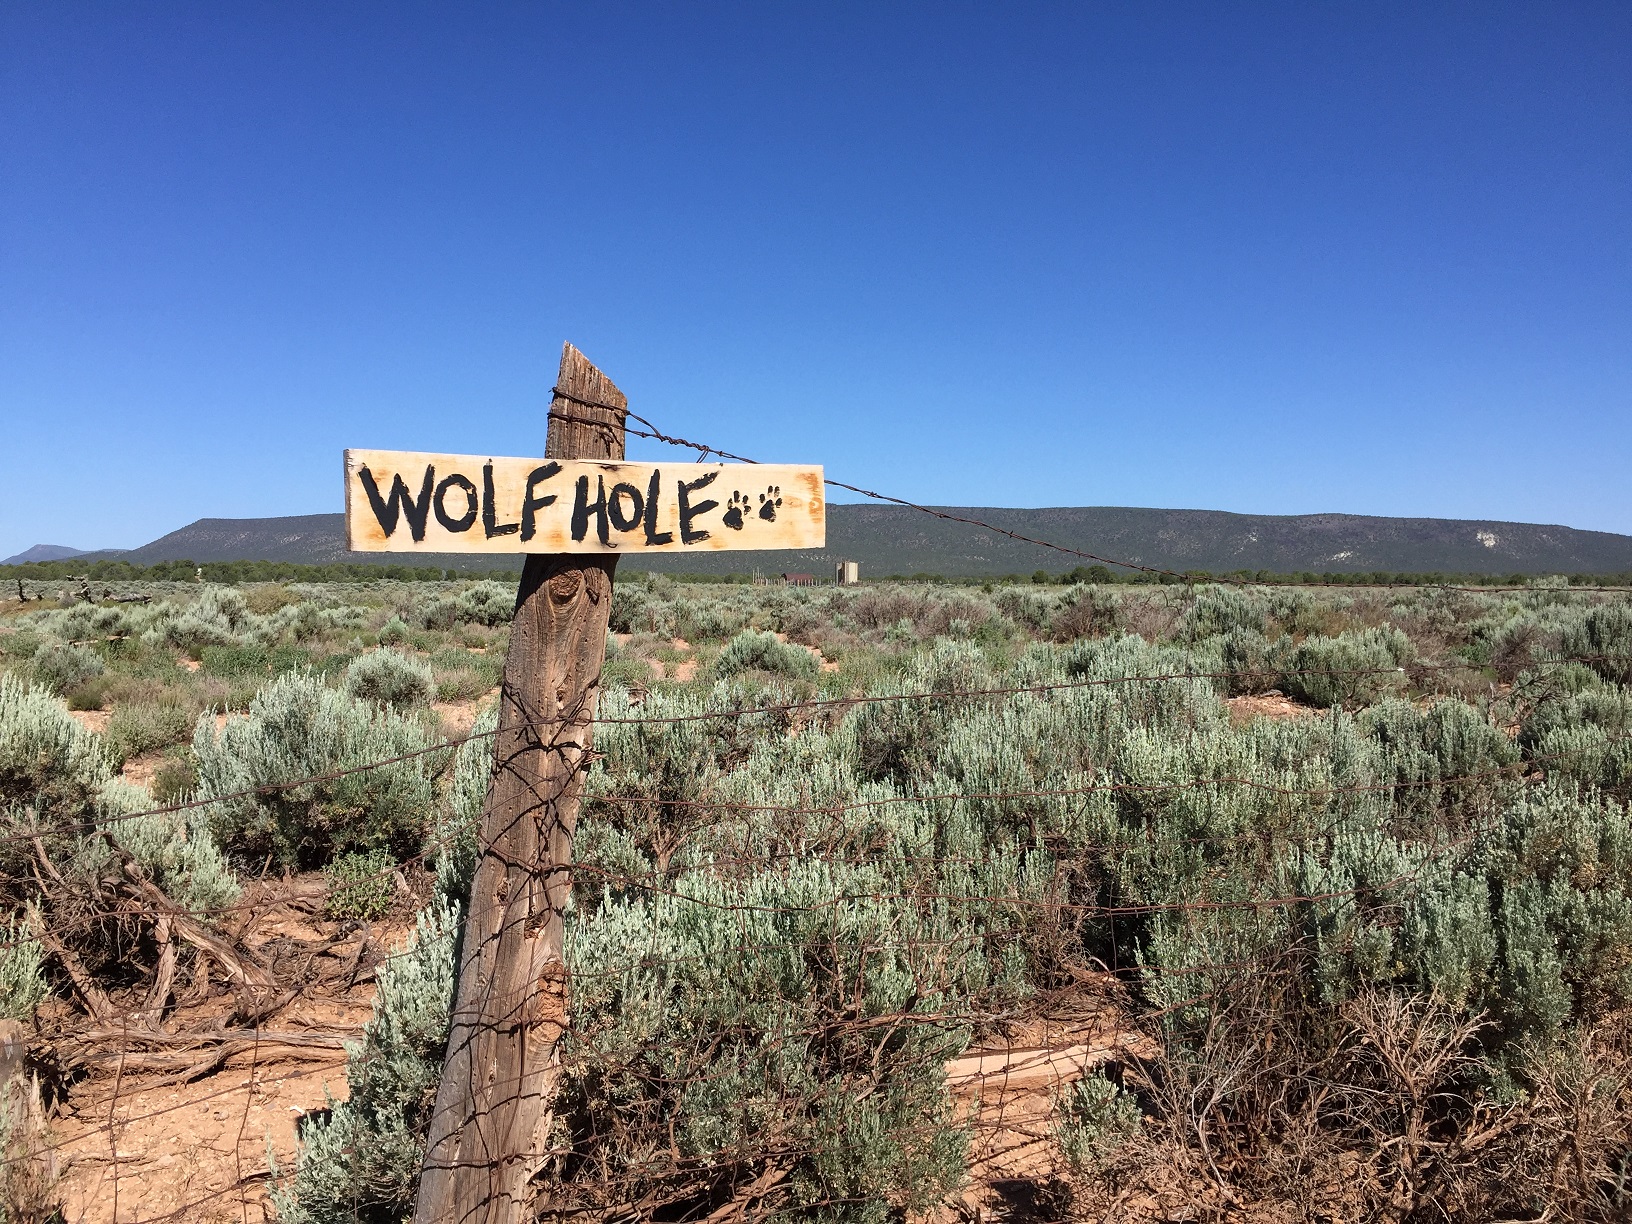 The Wolf Hole sign and property